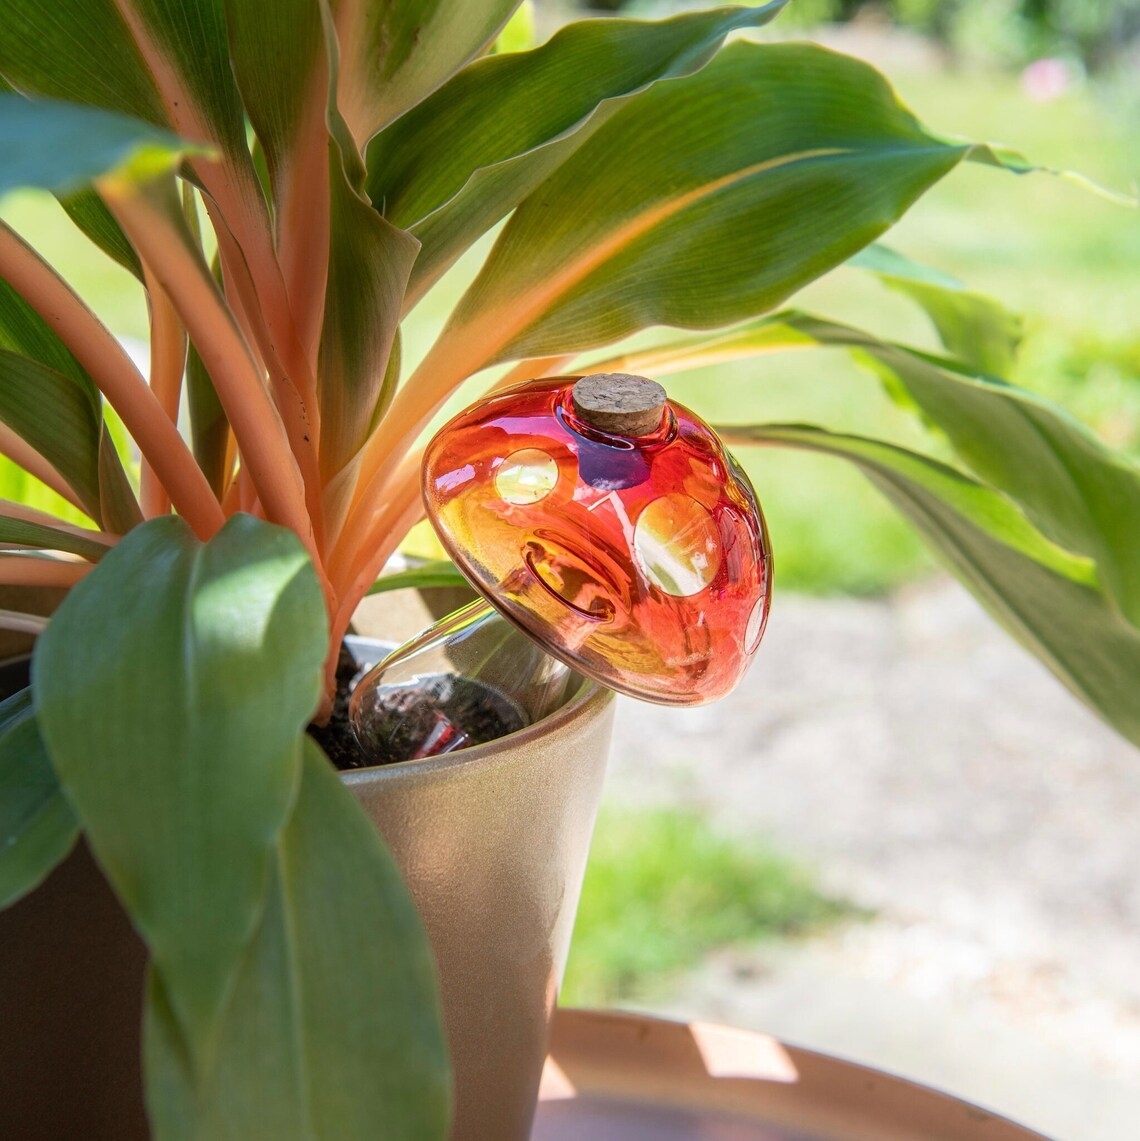 A decorative amber-colored glass watering bulb inserted in the soil of a potted plant